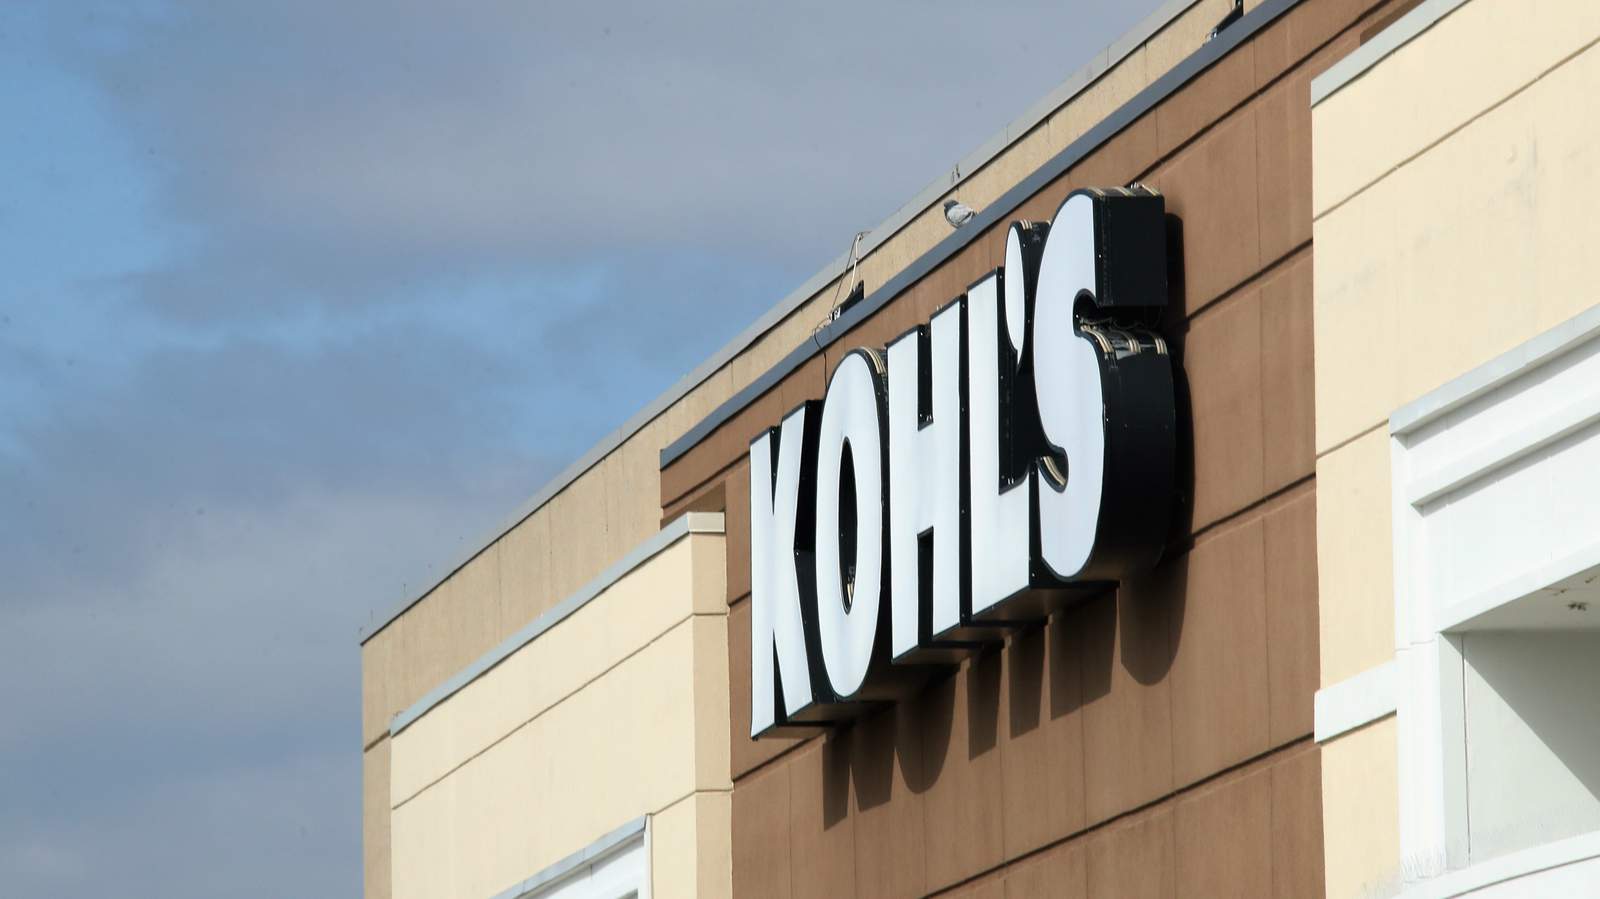 Kohls joins retailers closing for Thanksgiving Day